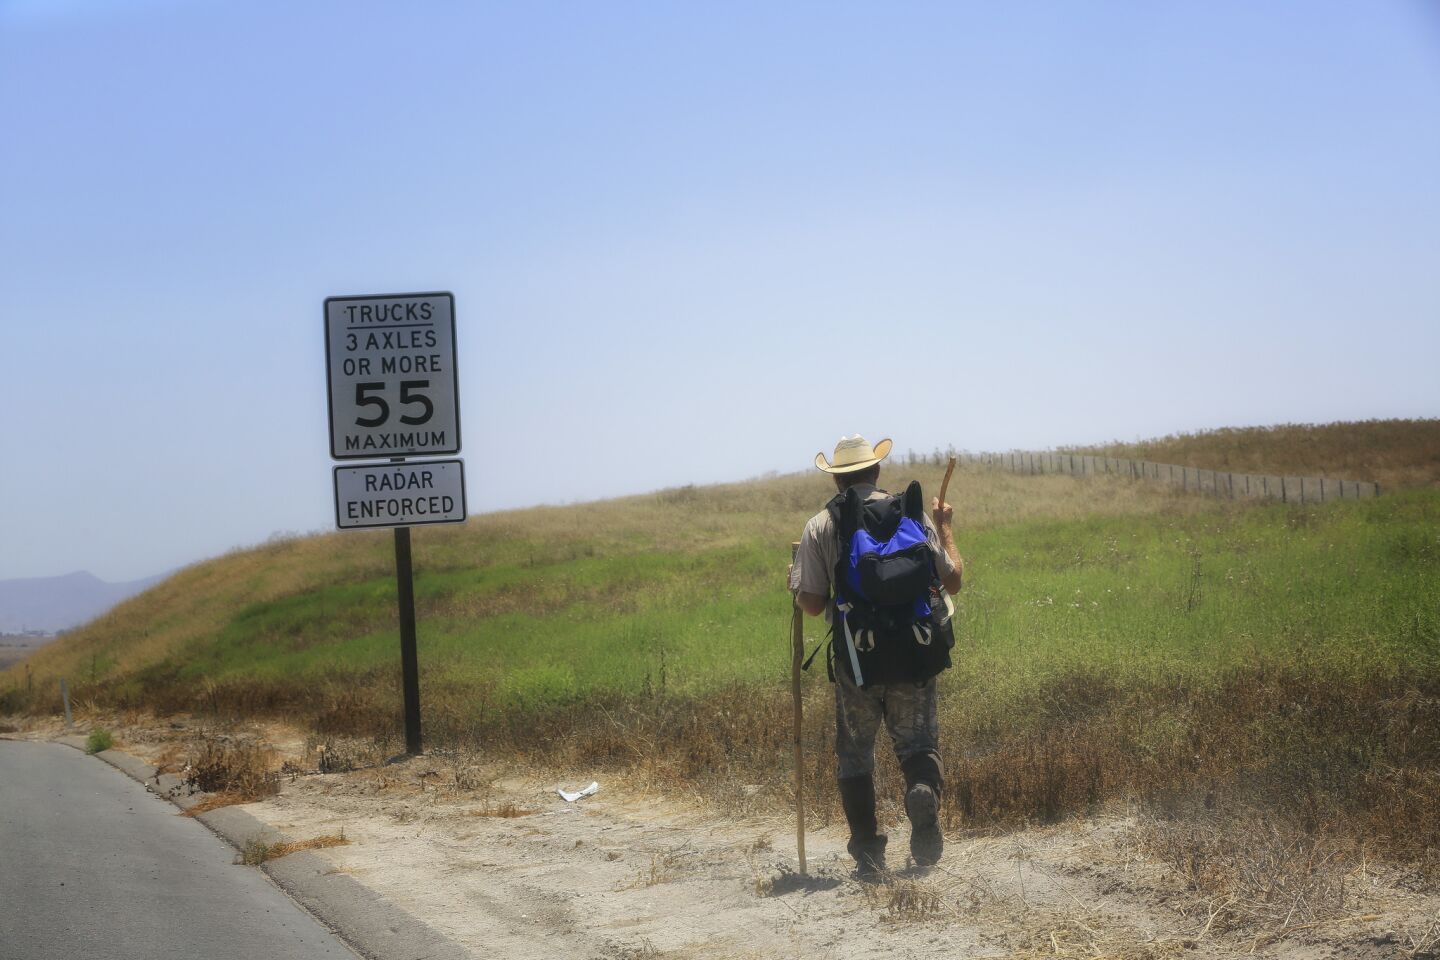 Walking the entire lenghth of the U.S. Mexico border